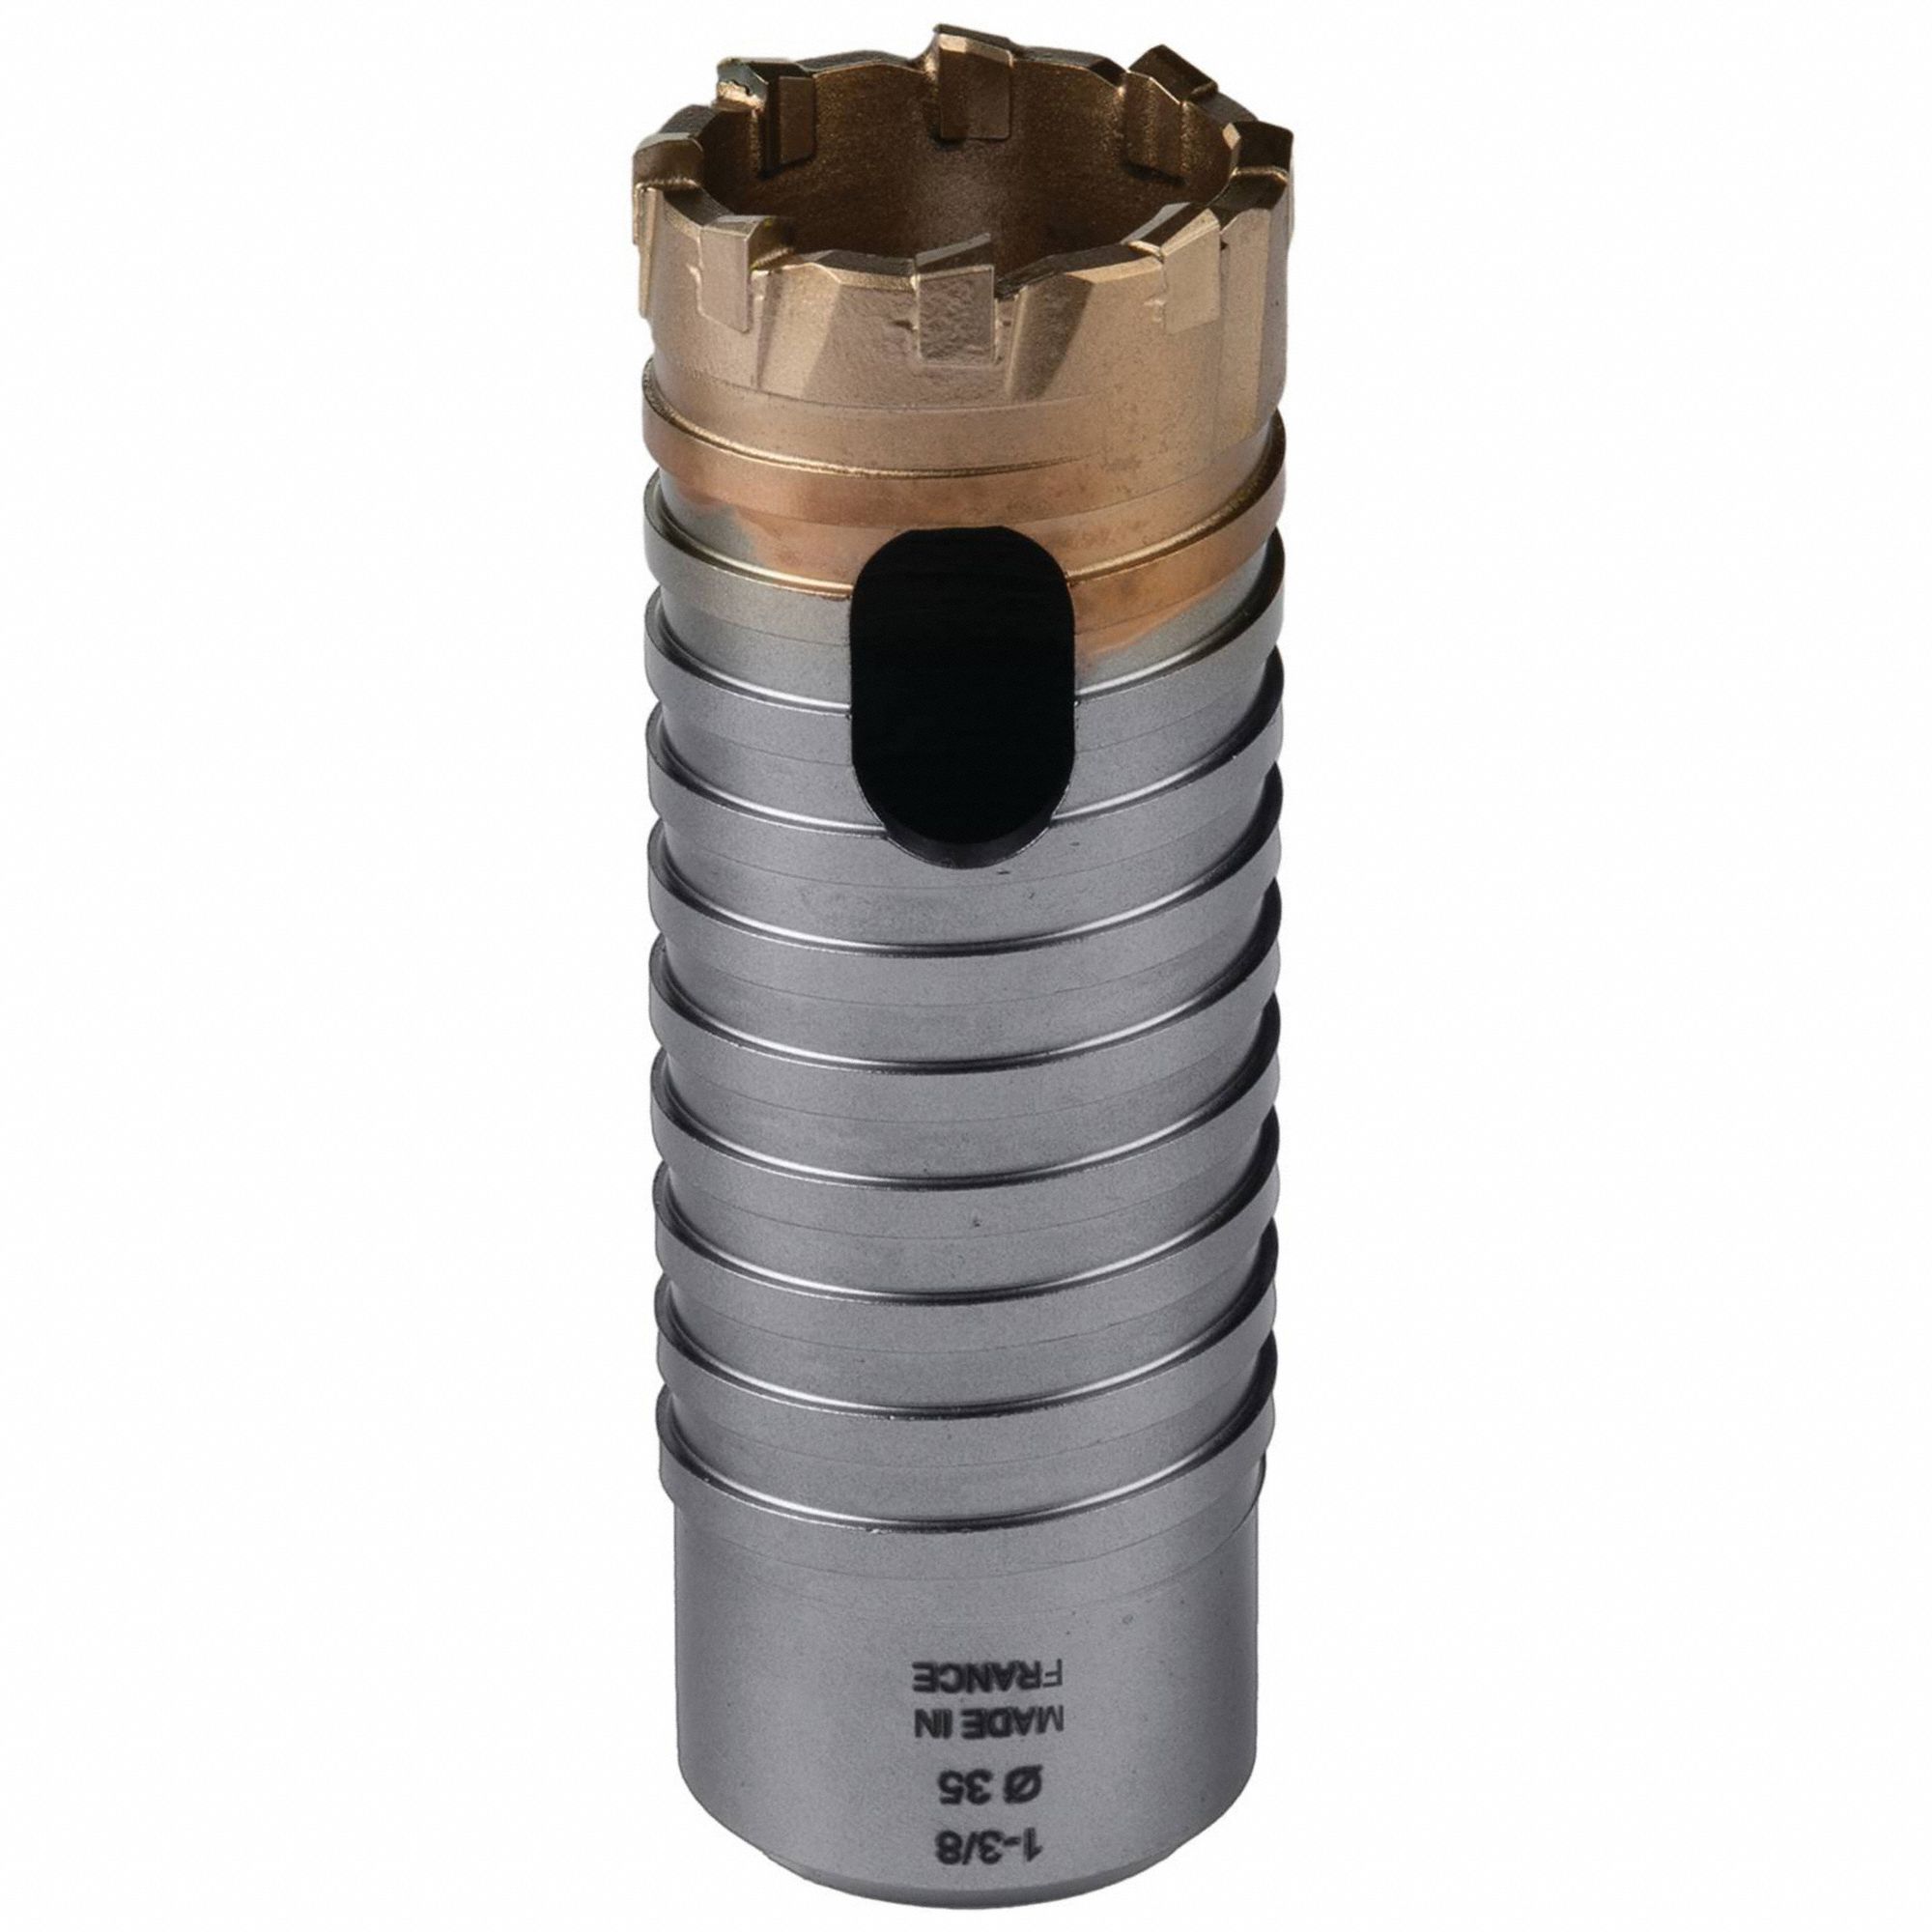 Rebar Cutter Drill Bit (Head Only) 1-3/8, 3/8 in Drill Bit Size, Carbide,  in Overall Length Grainger